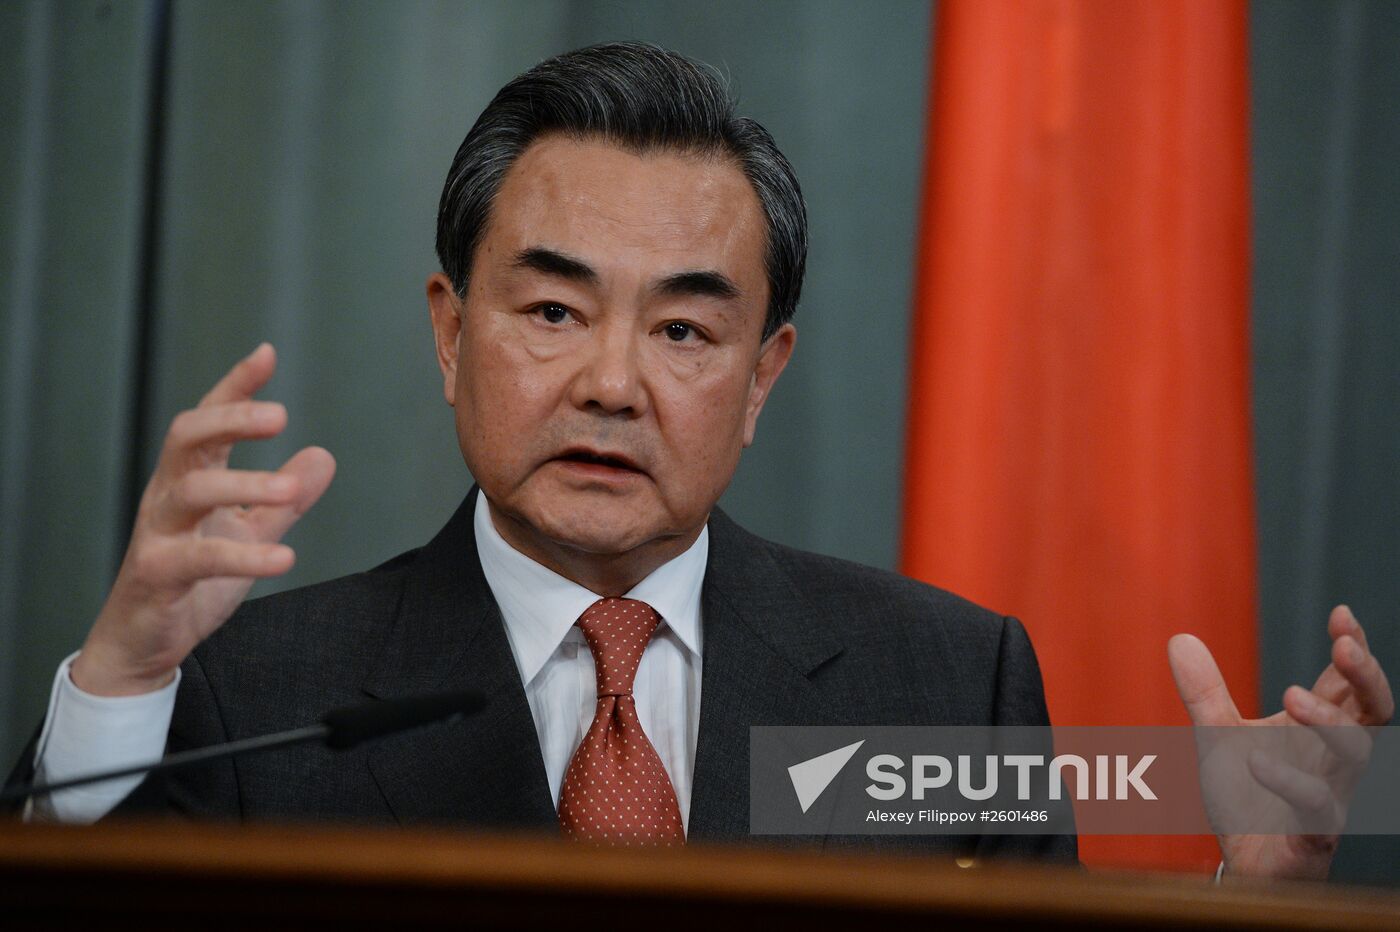 Russian Foreign Minister Sergei Lavrov meets with Chinese Foreign Minister Wang Yi